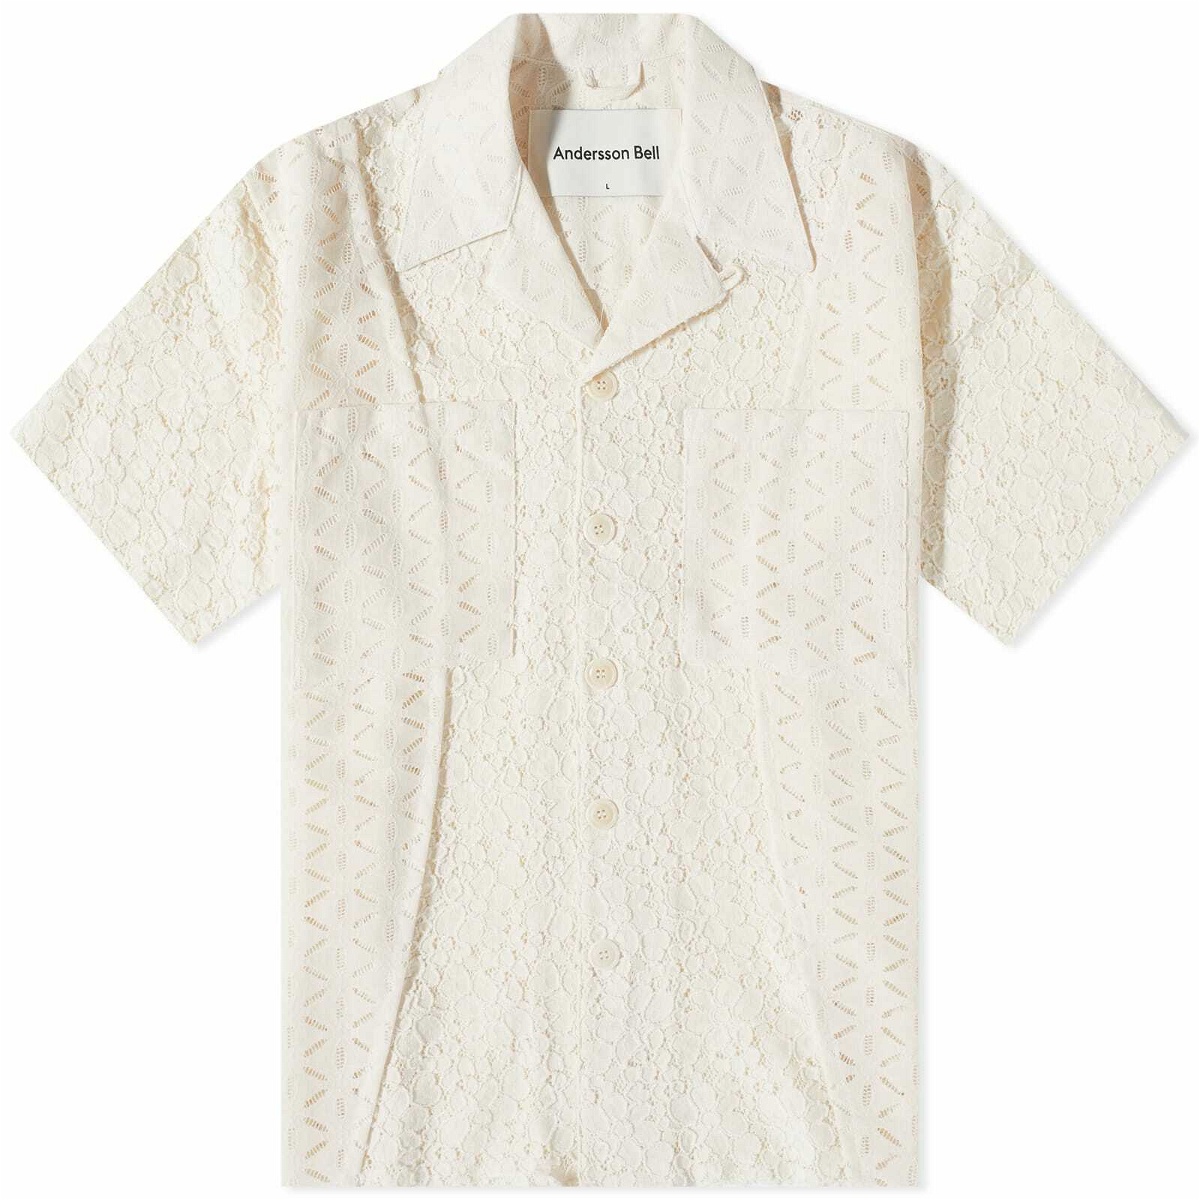 Andersson Bell Men's Flower Lace Vacation Shirt in Ecru Andersson Bell